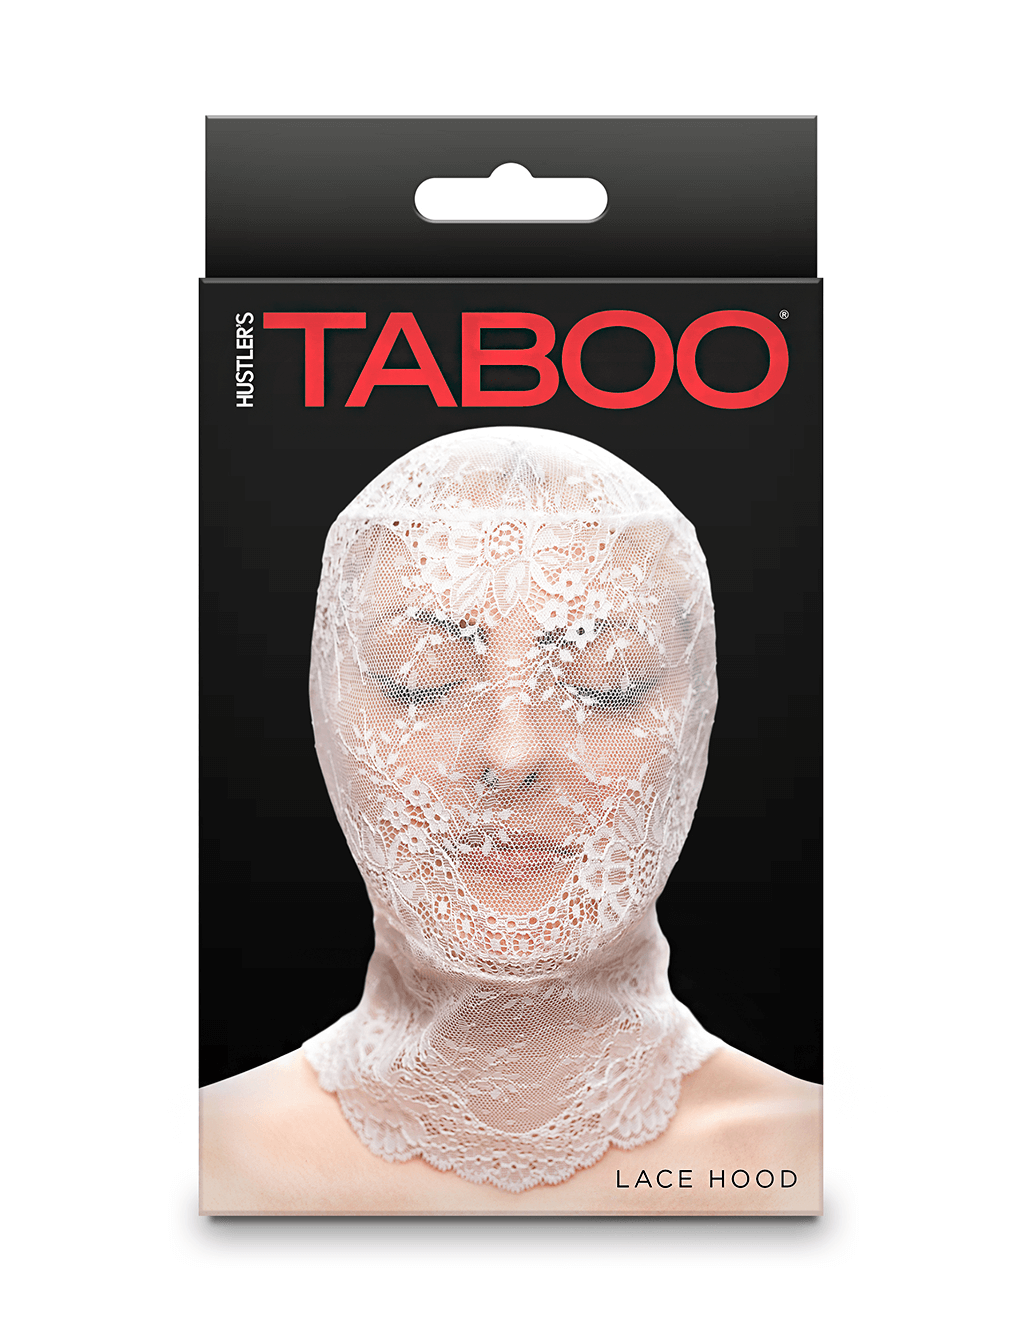 Taboo Lace Hood - White - Box - Front